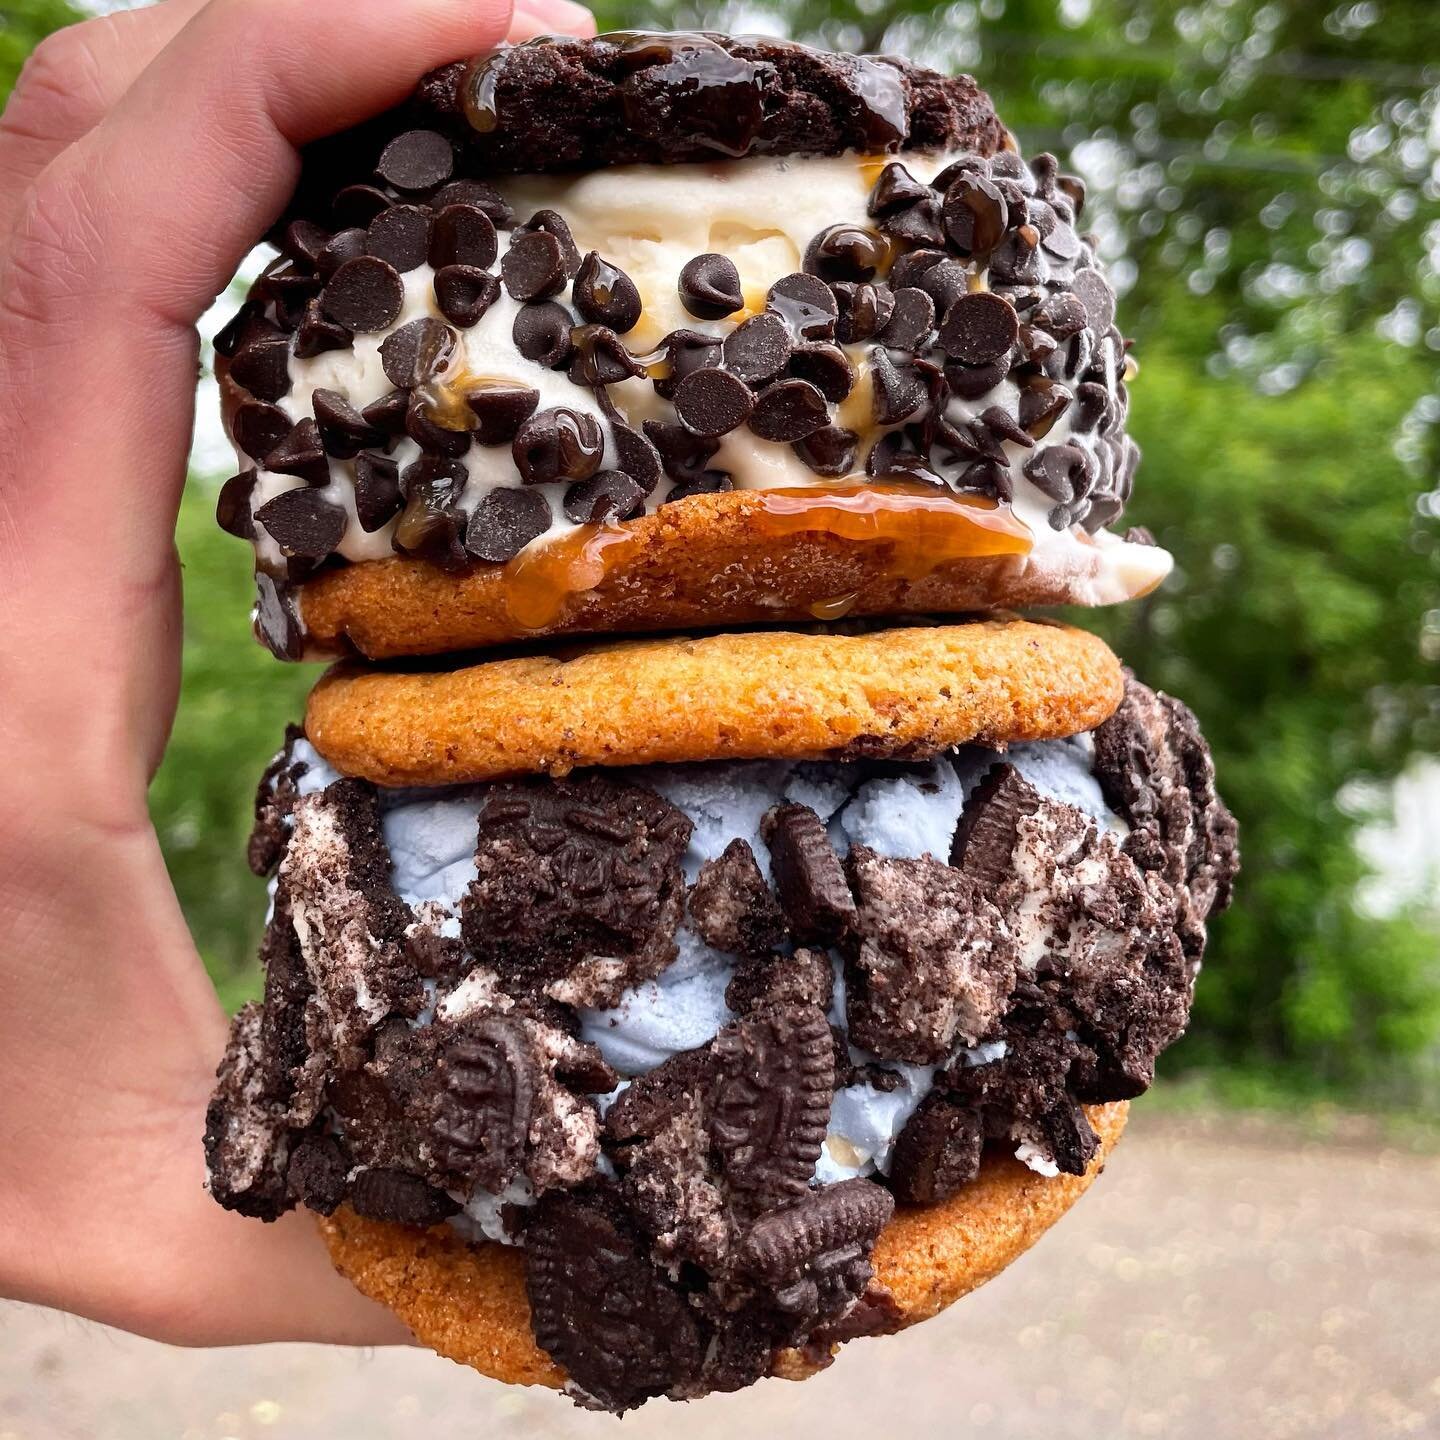 What&rsquo;s better than an ice cream cookie sandwich? Two ice cream cookie sandwiches! #nelliesicecream  Top 📷 : chocolate chocolate chip cookie on the top, maple bacon 🥓 ice cream rolled in mini chocolate chips with a chocolate chip cookie on the